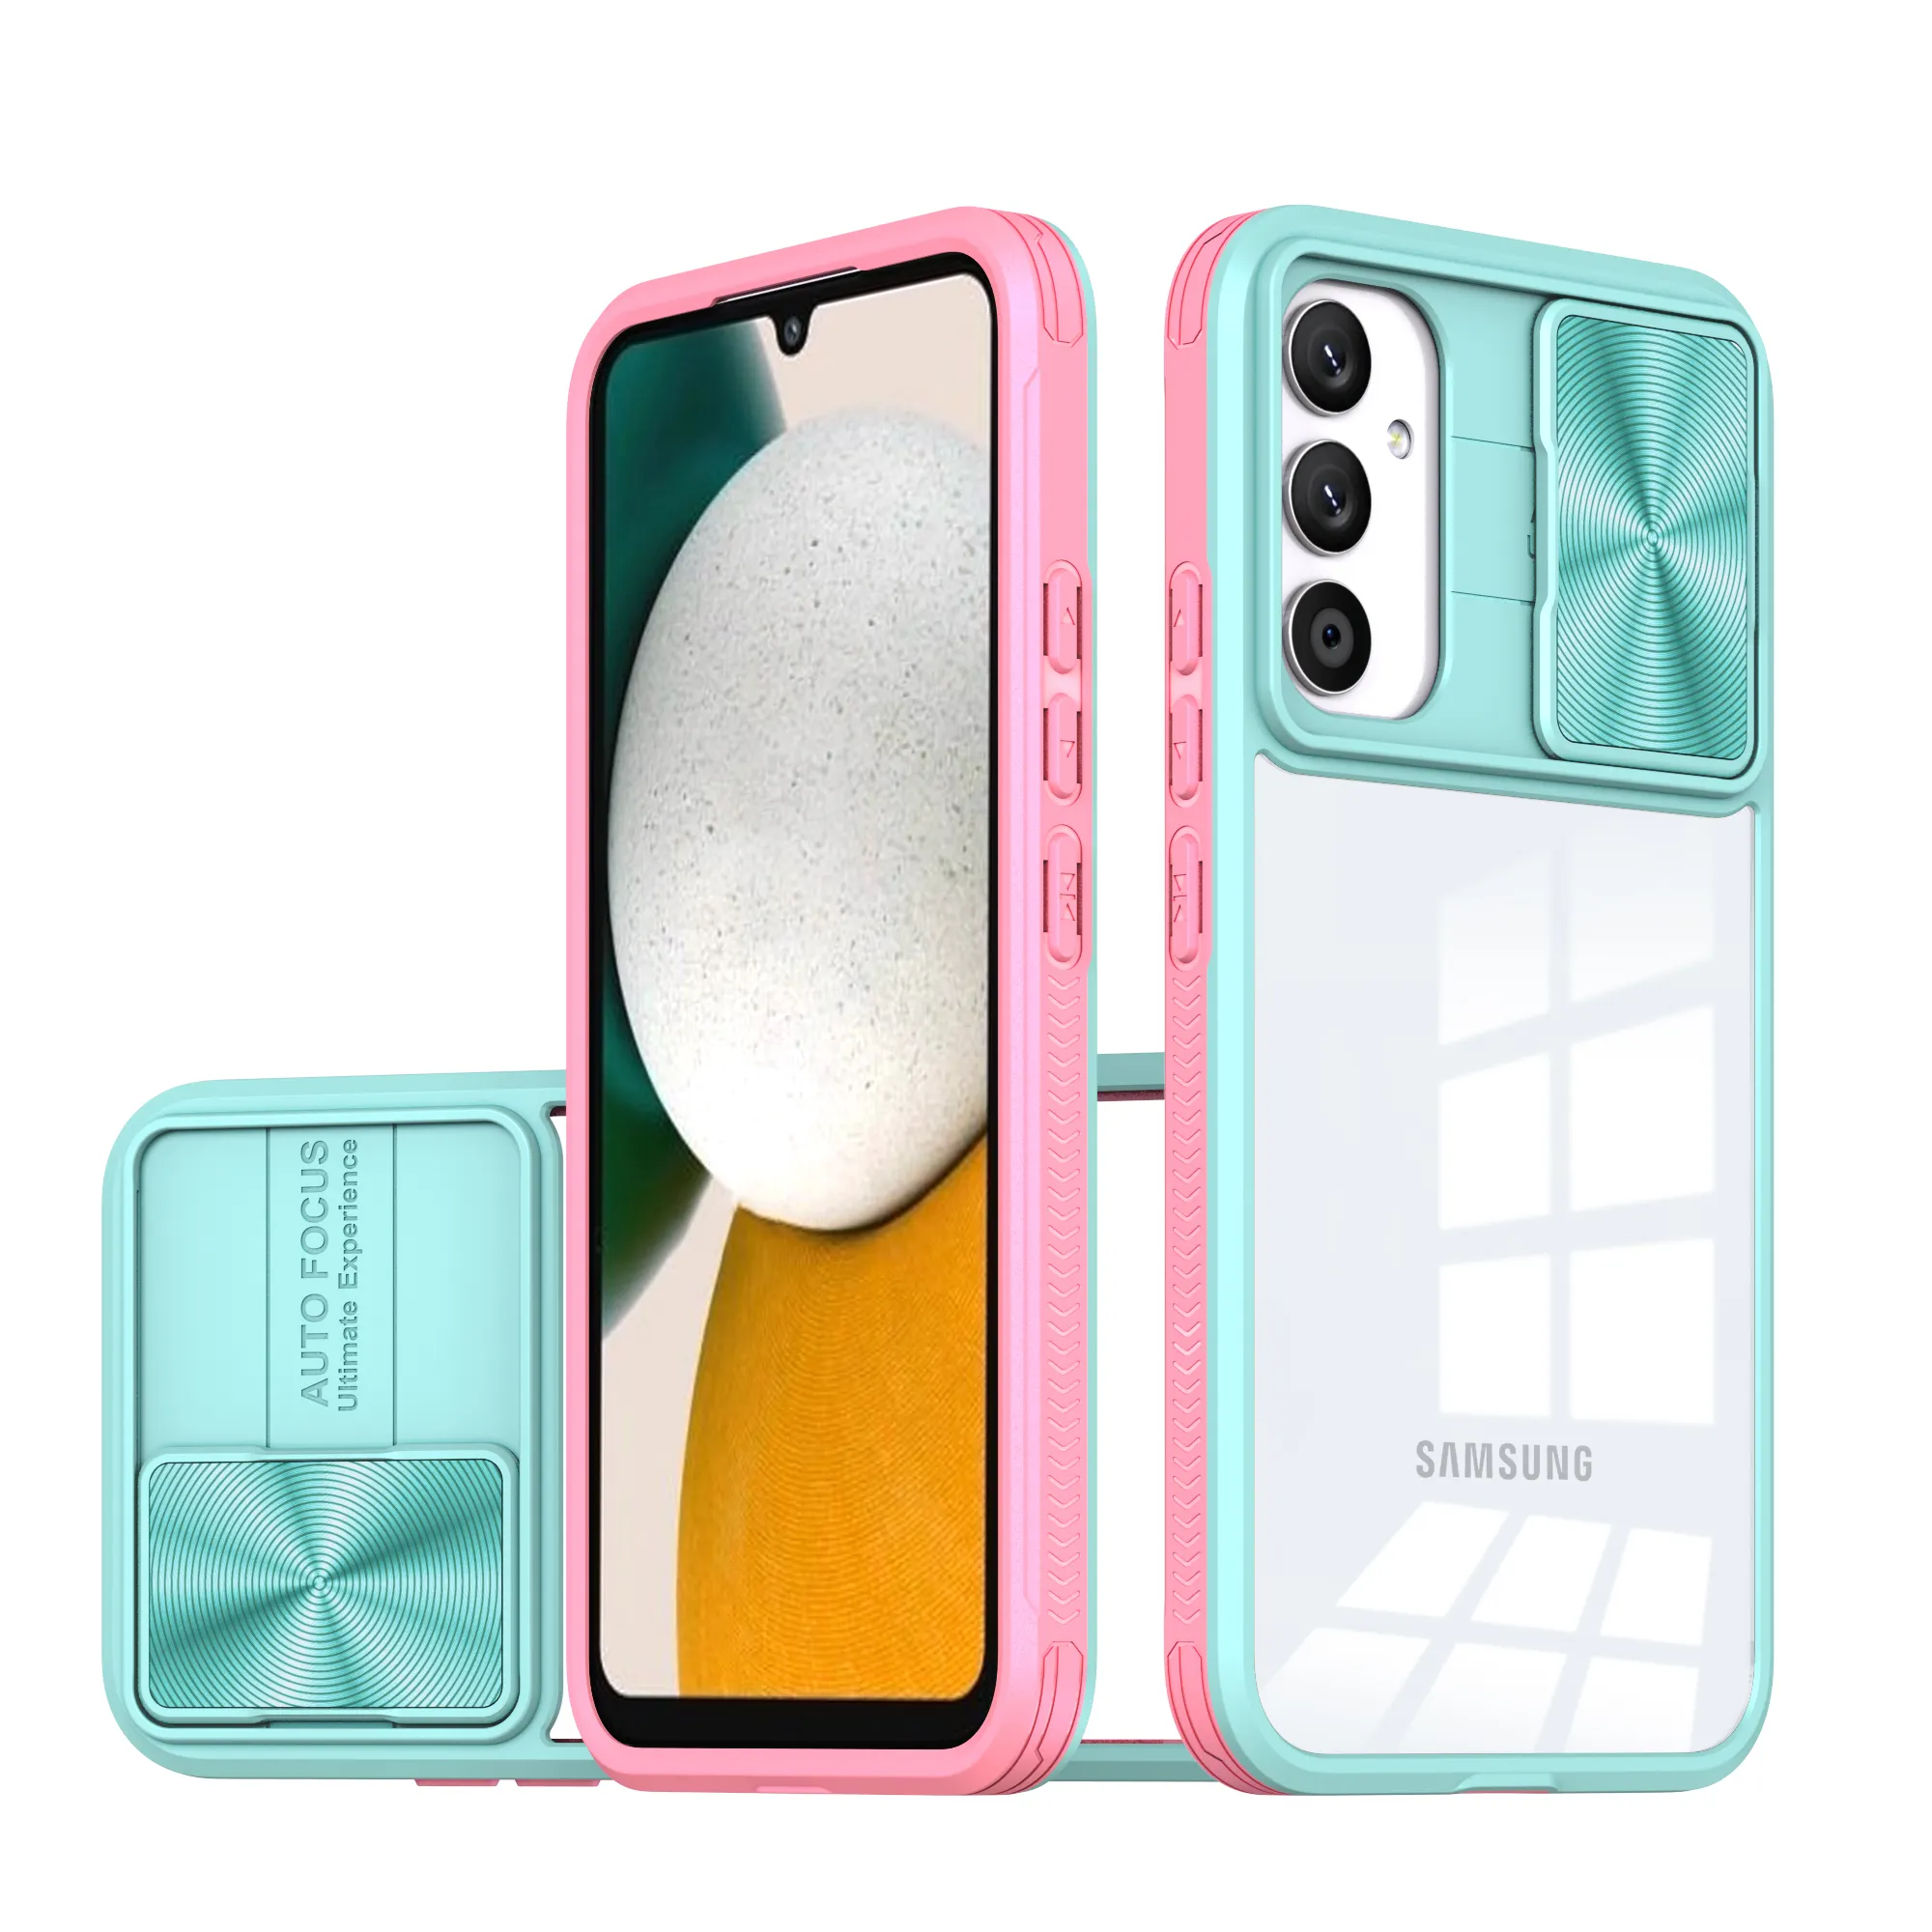 for Xiaomi Redmi A2 A2 Plus Case with Slide Lens Camera Cover Protection, Hard PC Back & Soft TPU Bumper